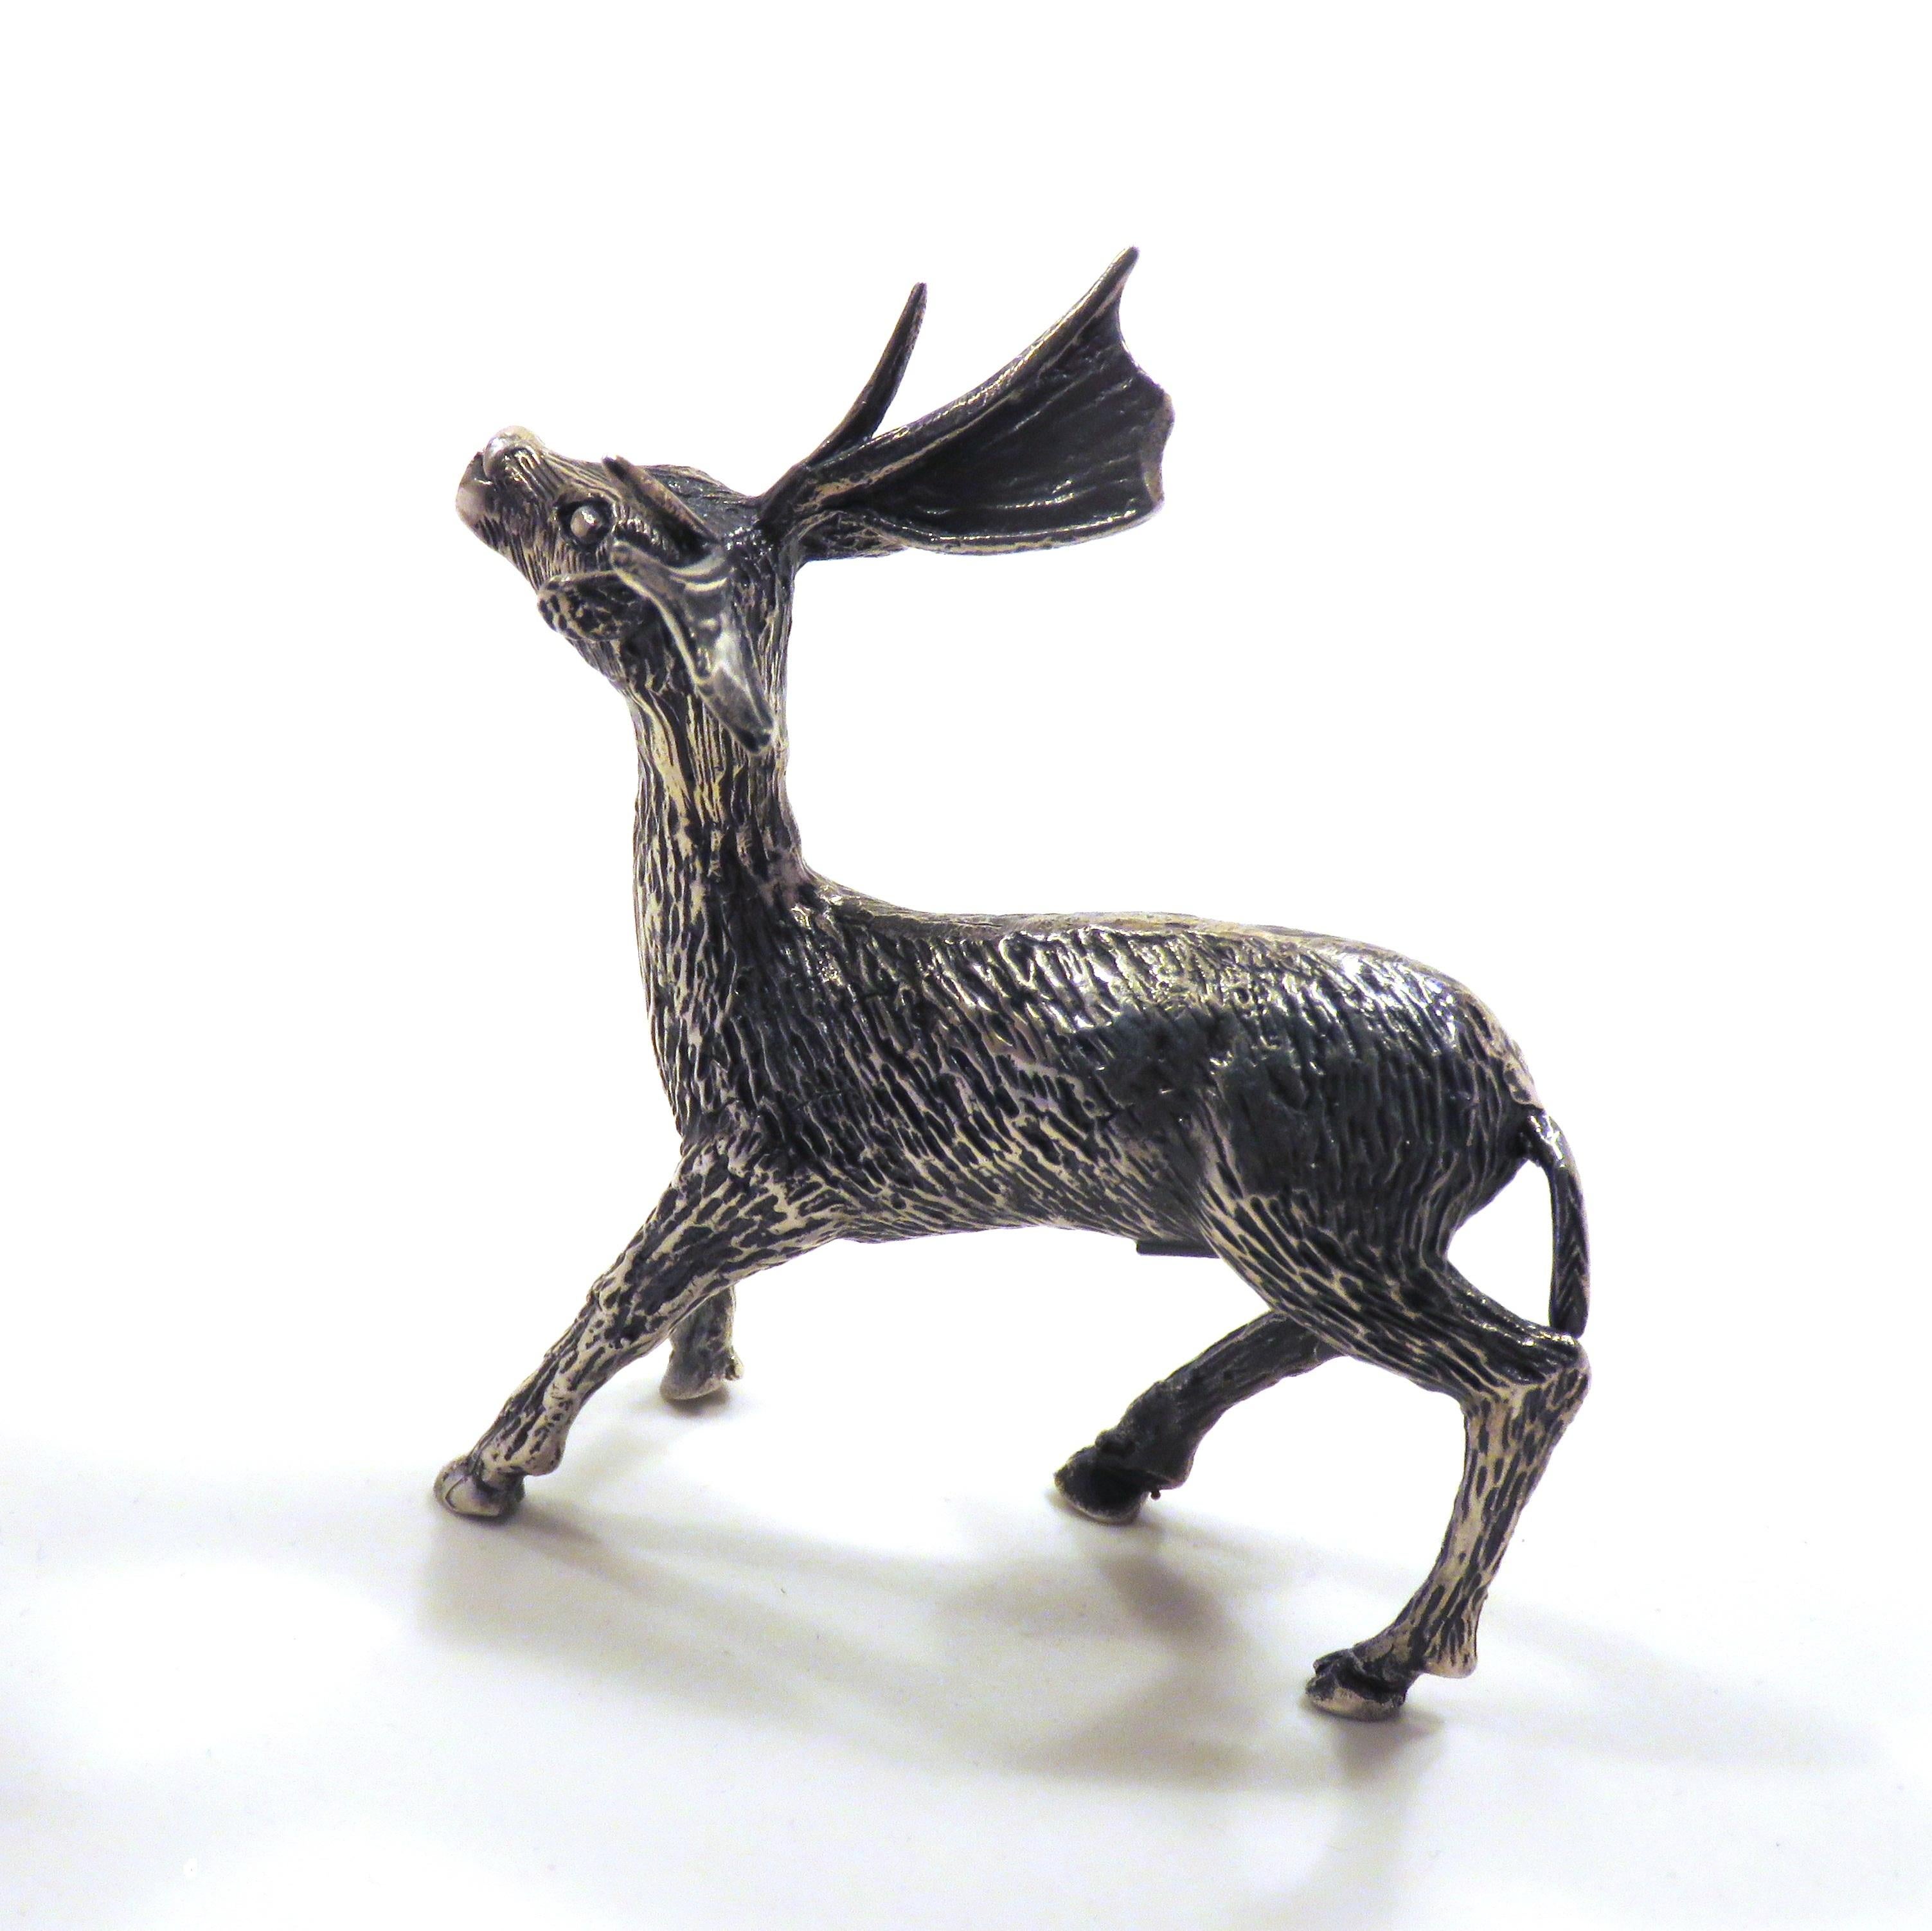 Solid silver fallow deer, in very good vintage condition.
Dimensions: Height 68 mm / 2.67 inches - Length 66 mm / 2.59 inches - Weight 45 grams.
It  is stamped with the Silver Italian Mark 800 - 59AR SOA SOCIETA' ORAFA ARENTINA - AREZZO -